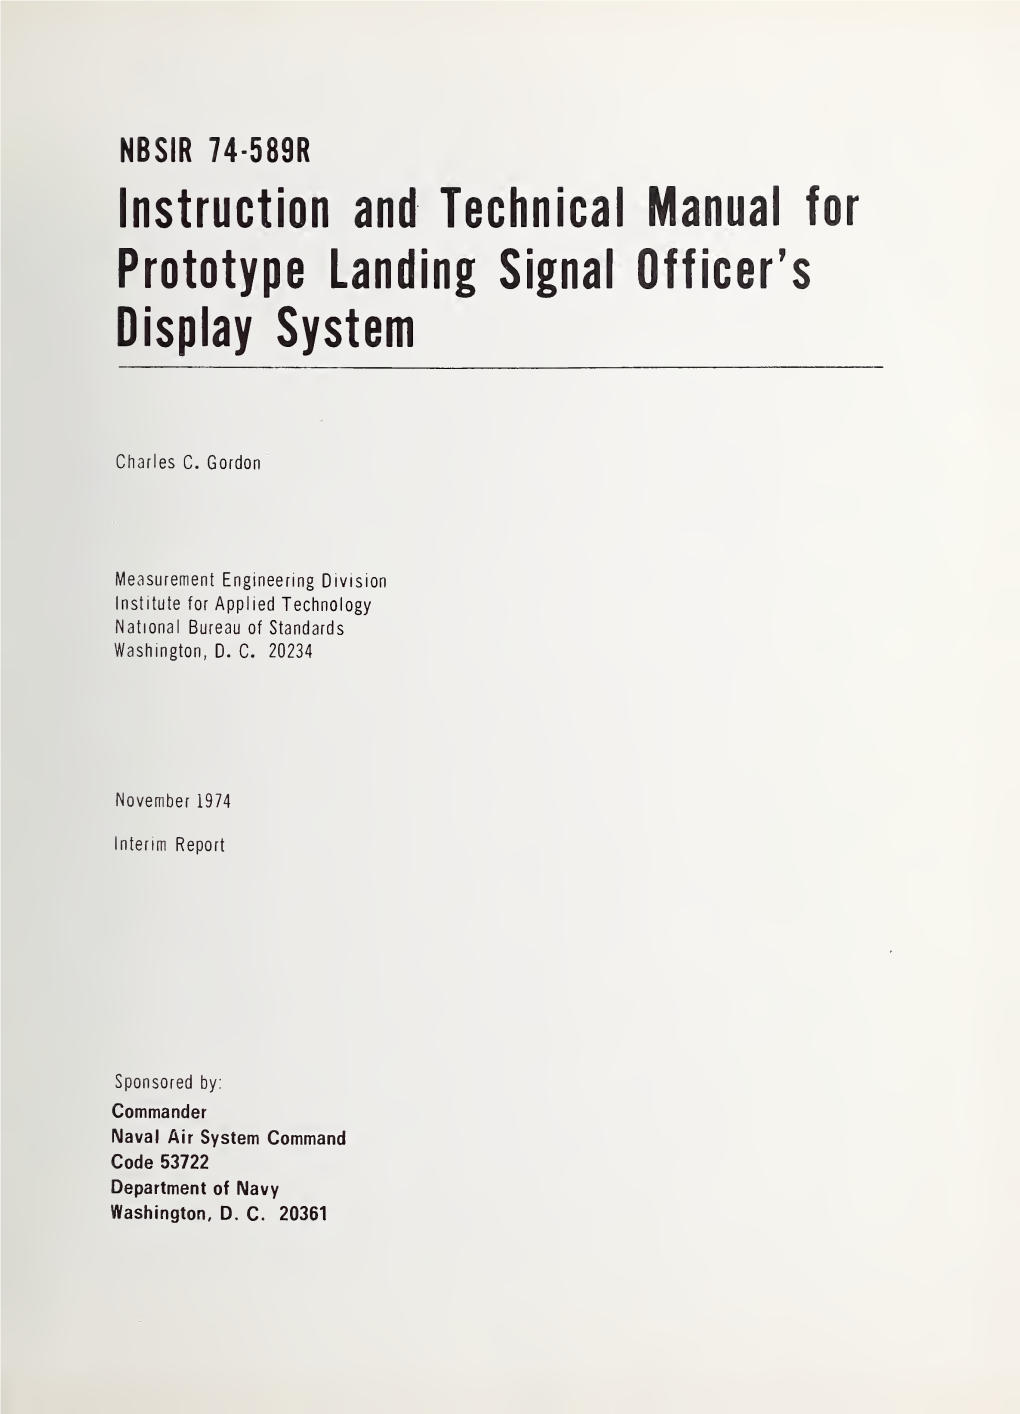 Instruction and Technical Manual for Prototype Landing Signal Officer's Display System